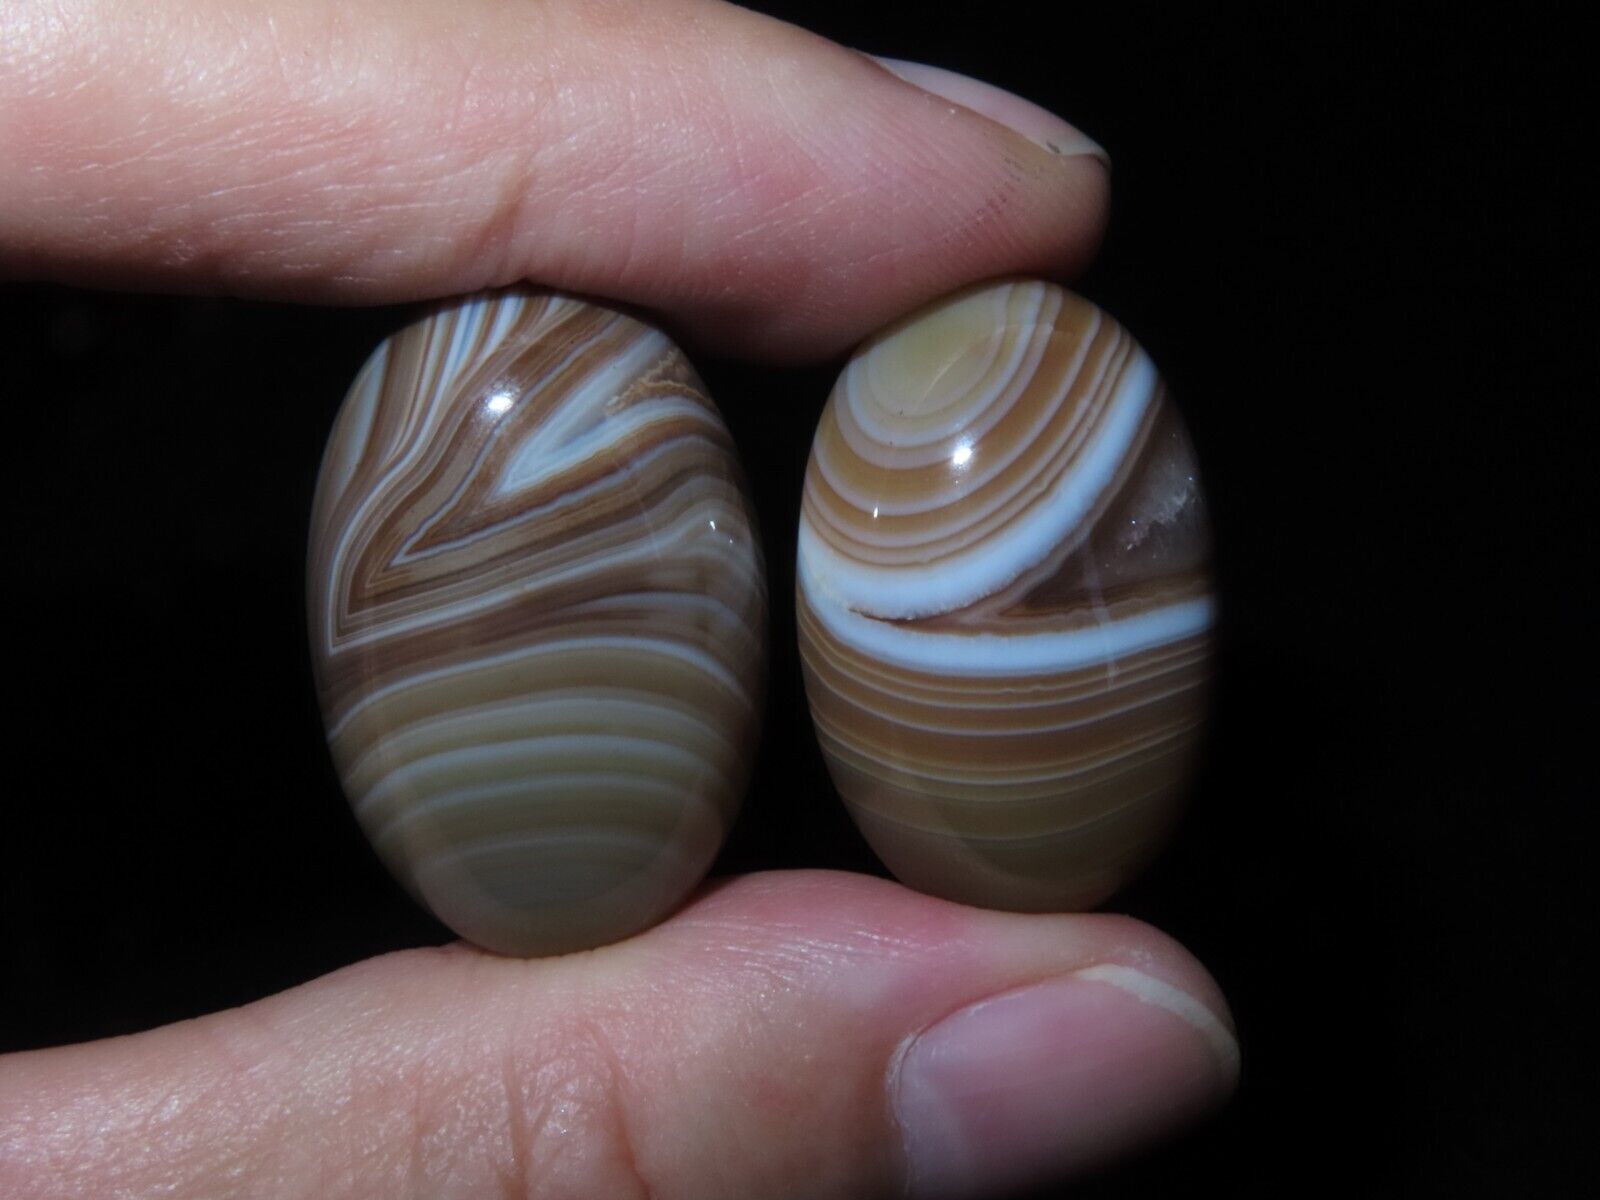 2x Beautiful Nepal Tibet Oval Shaped Cabochon Cut Banded Agate (d1)